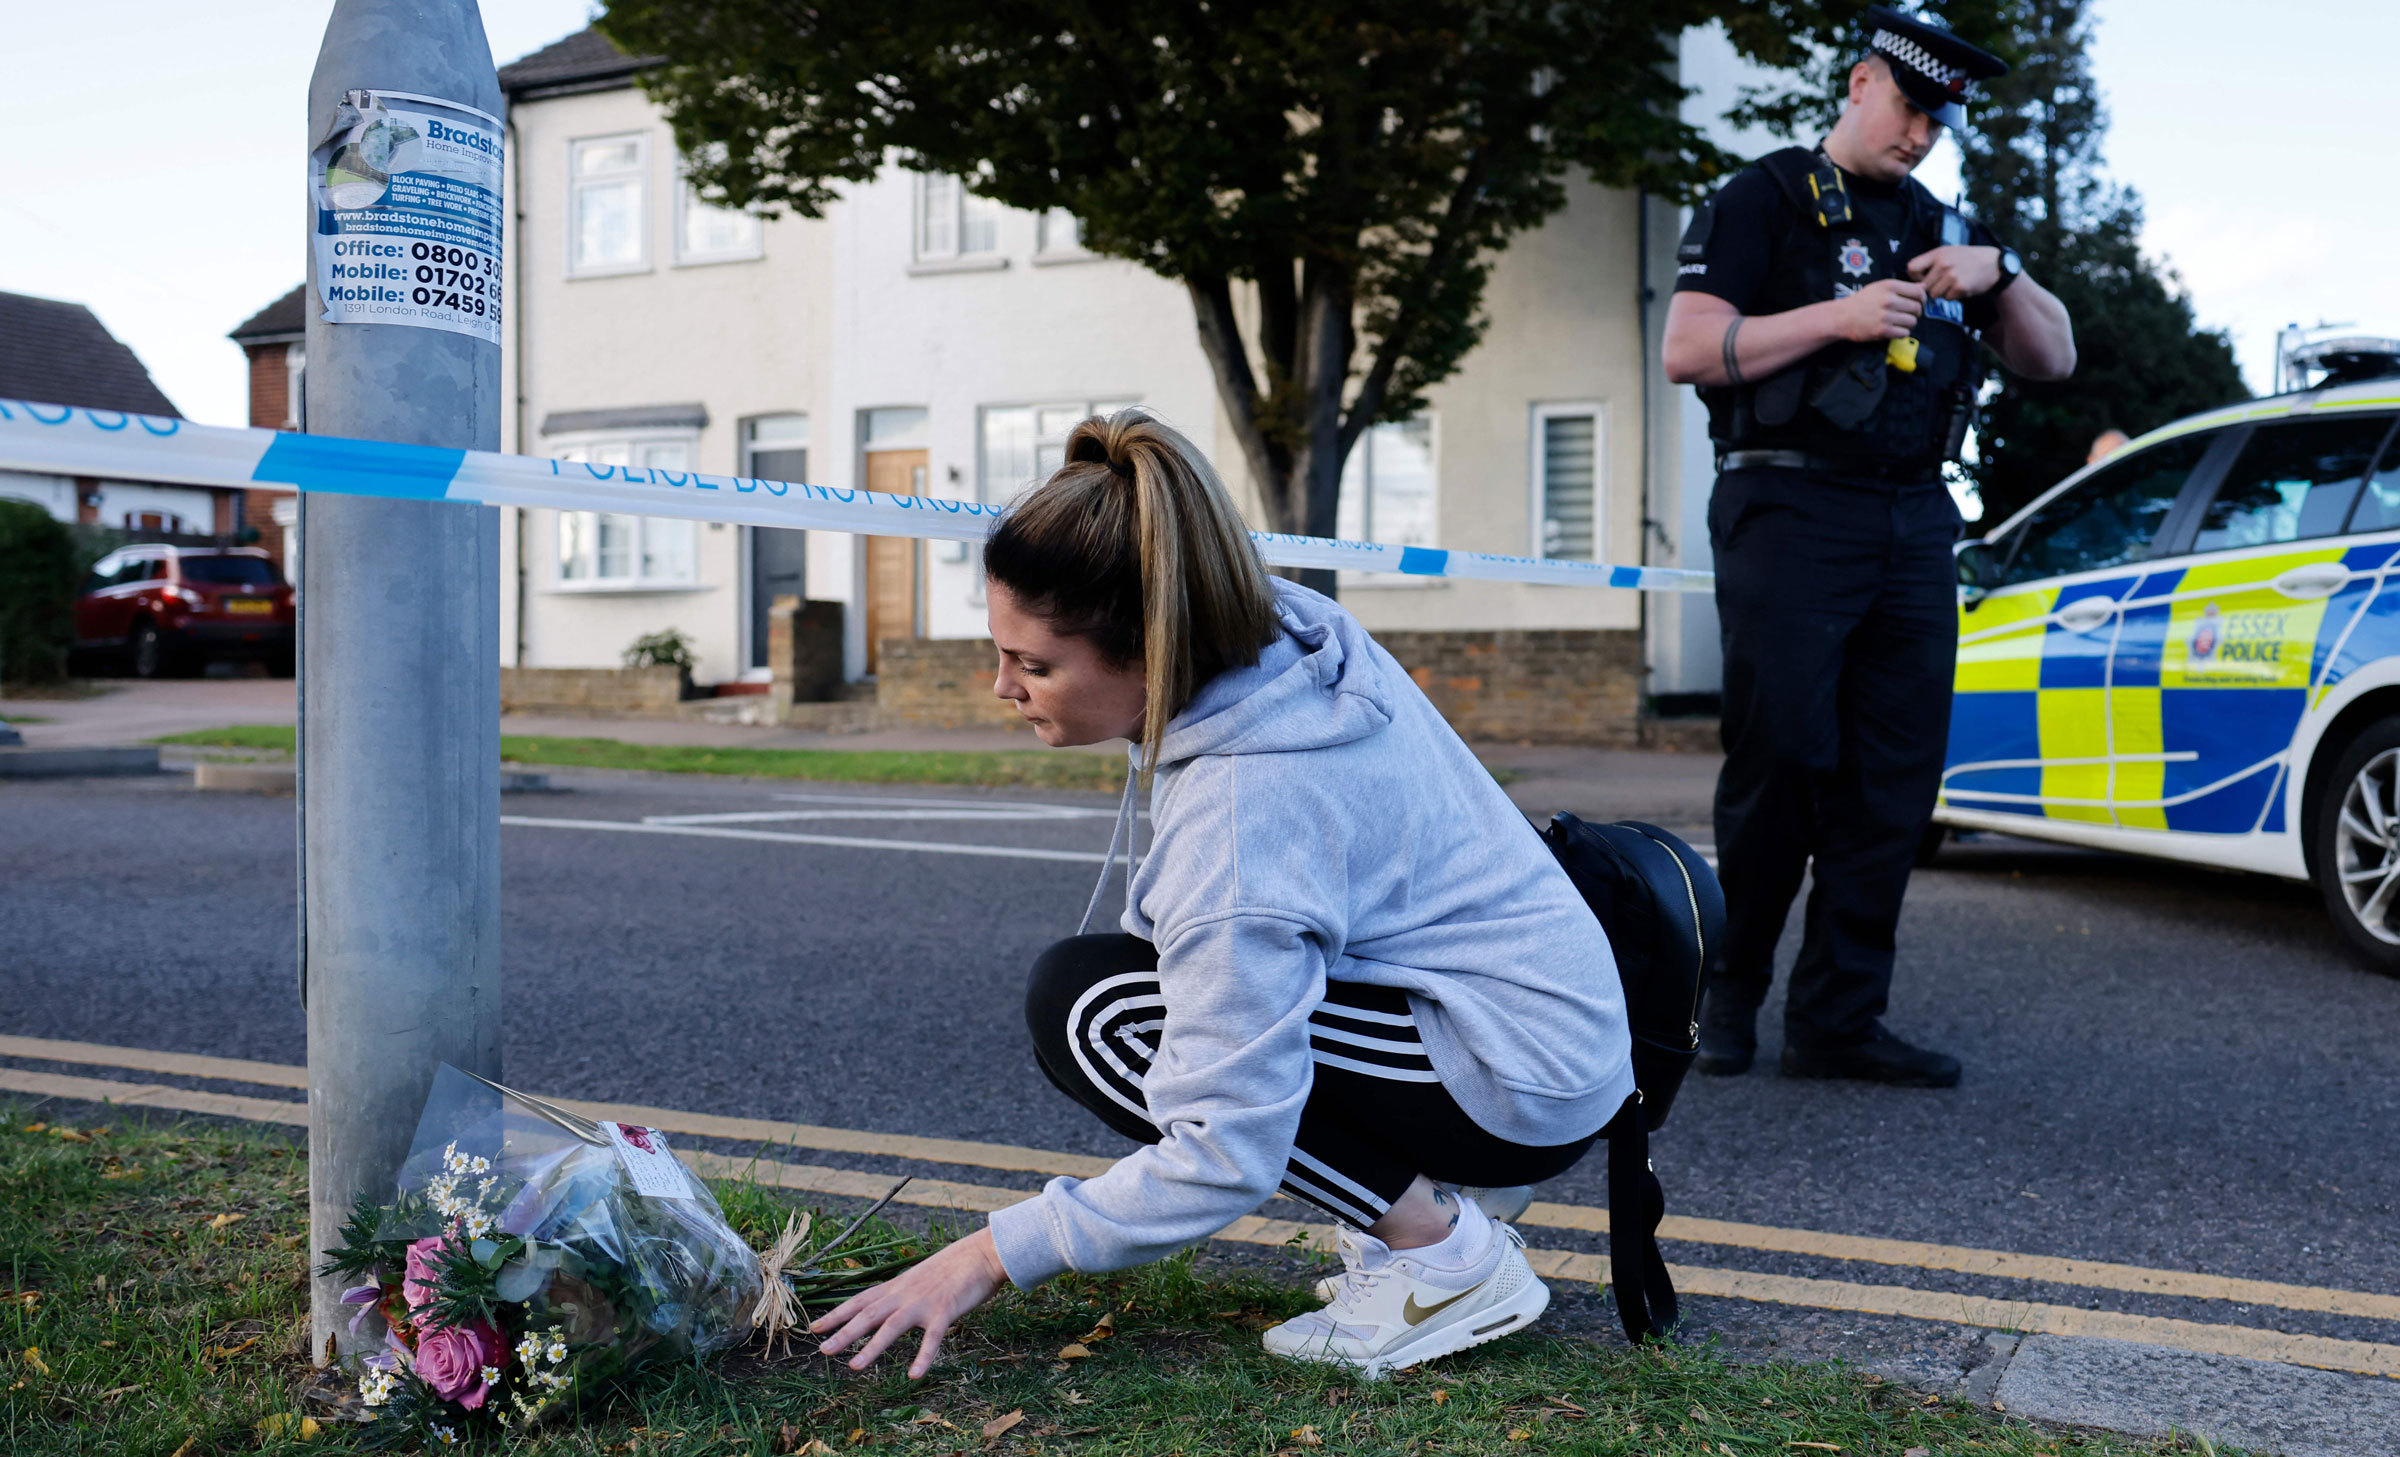 A woman leaves flowers at a police cordon near the scene.